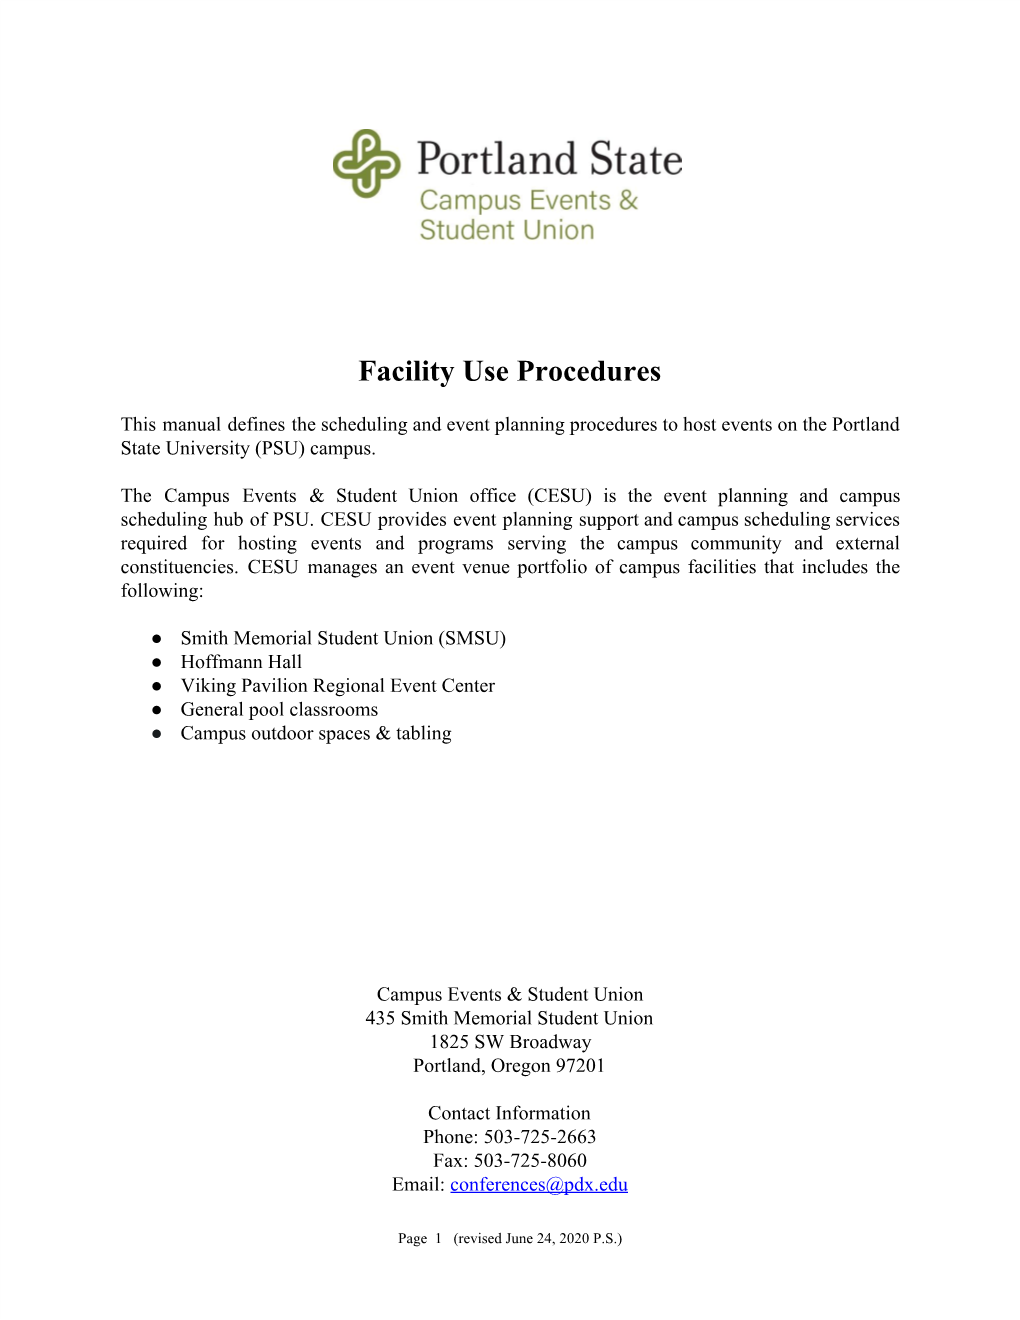 Facilities Use Agreement Portland State Campus Events Student Union